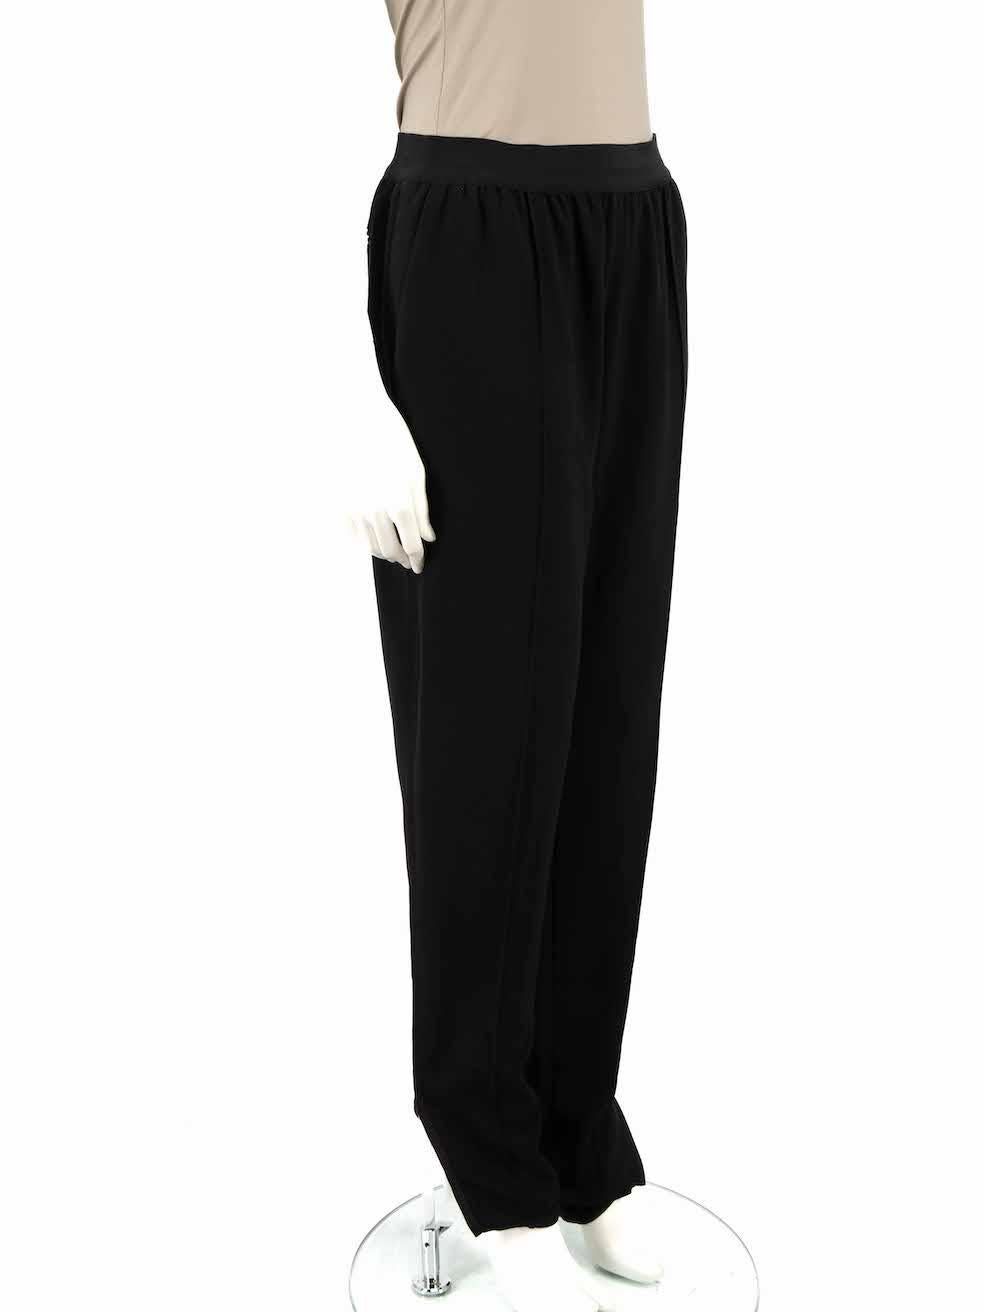 CONDITION is Very good. Minimal wear to trousers is evident. Minimal wear to both cuffs have become un-tacked from the lining on this used Céline designer resale item.
 
 
 
 Details
 
 
 Black
 
 Viscose
 
 Tapered trousers
 
 High rise
 
